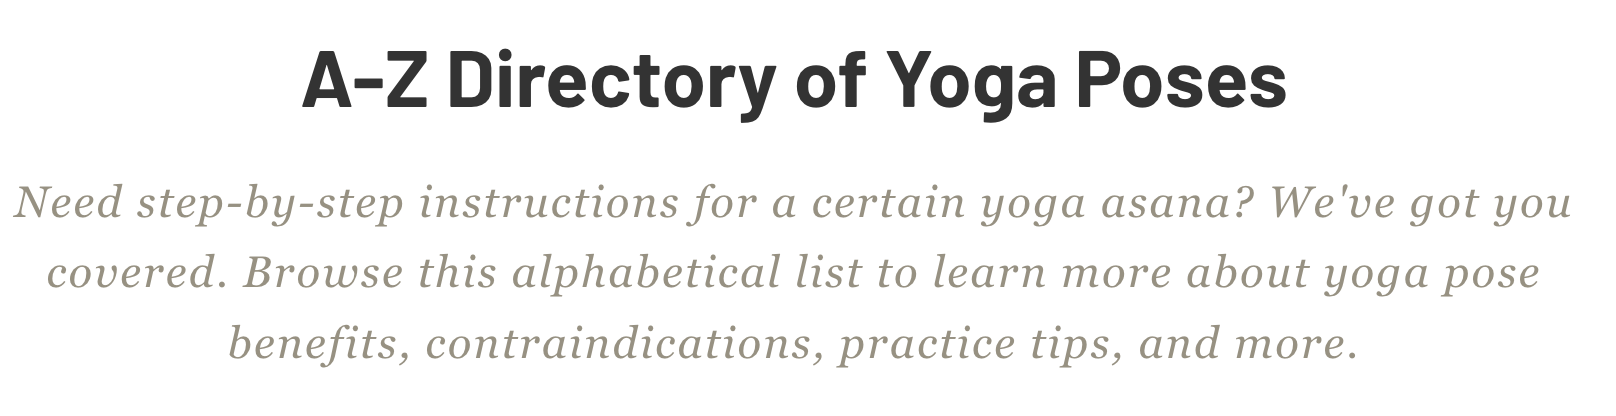 Excerpt of A-Z directory of yoga poses